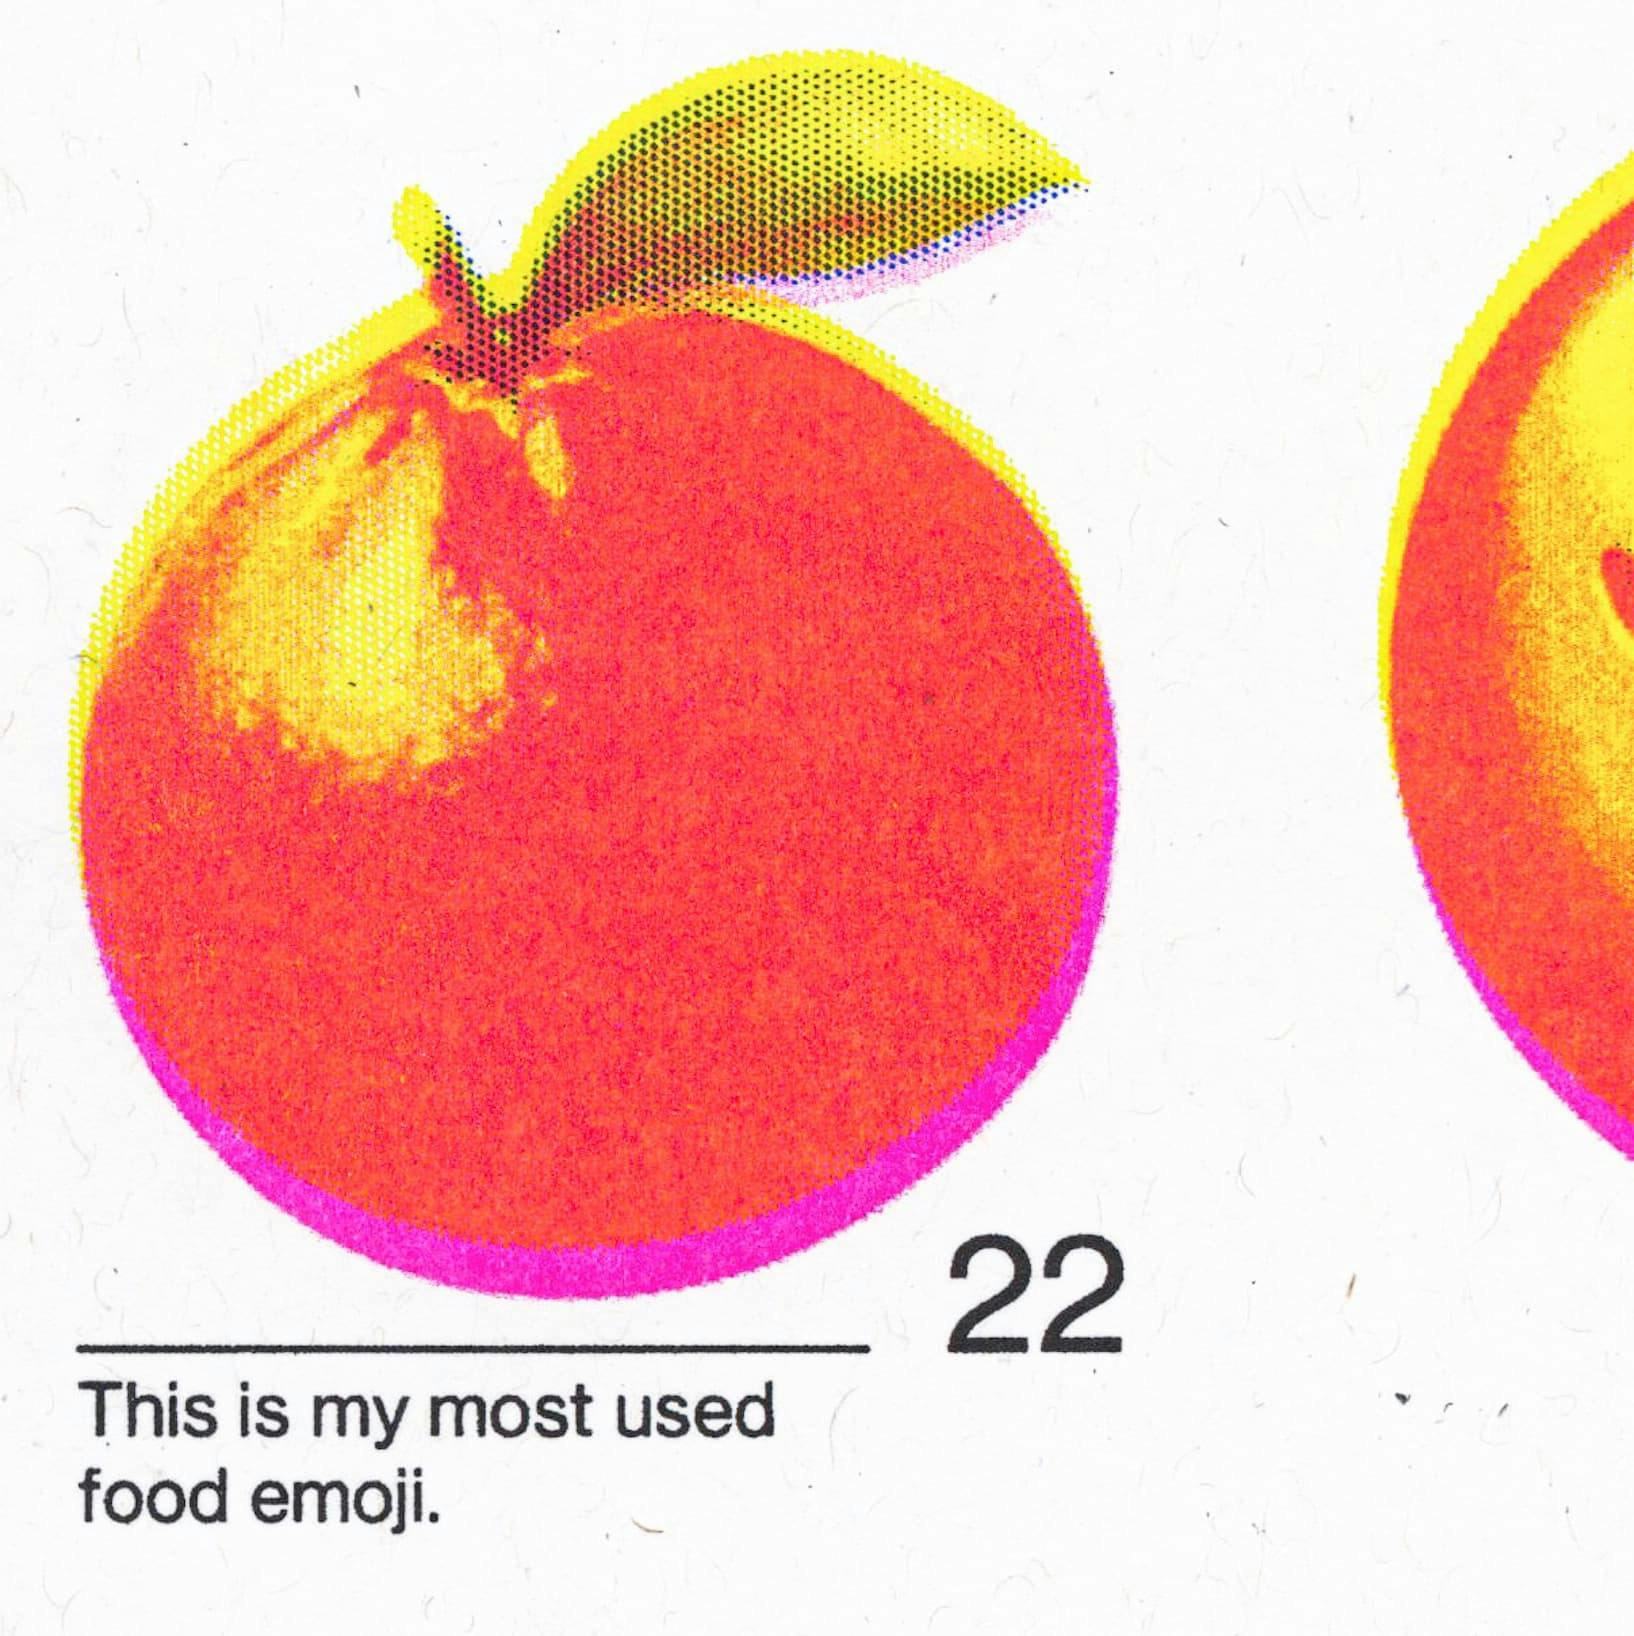 Detailed view of a vibrant orange fruit emoji with the caption "This is my most used food emoji" and a count of "22", emphasizing the risograph print quality.